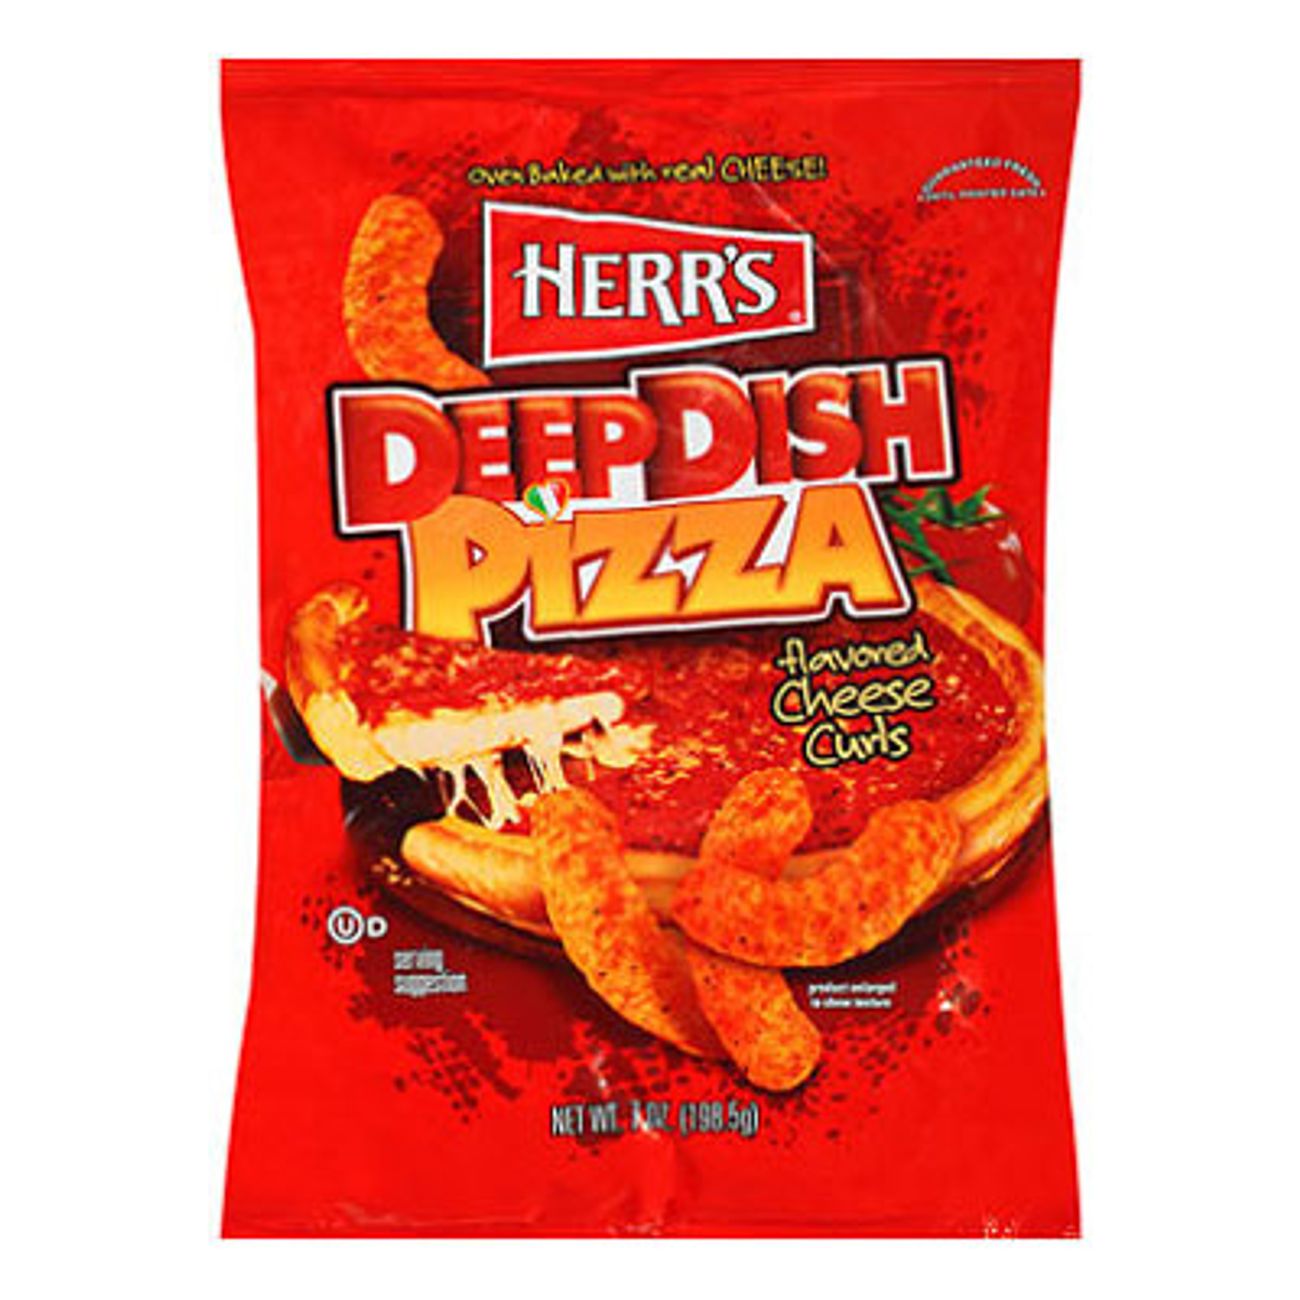 herrs-pizza-flavored-cheeze-curls-1